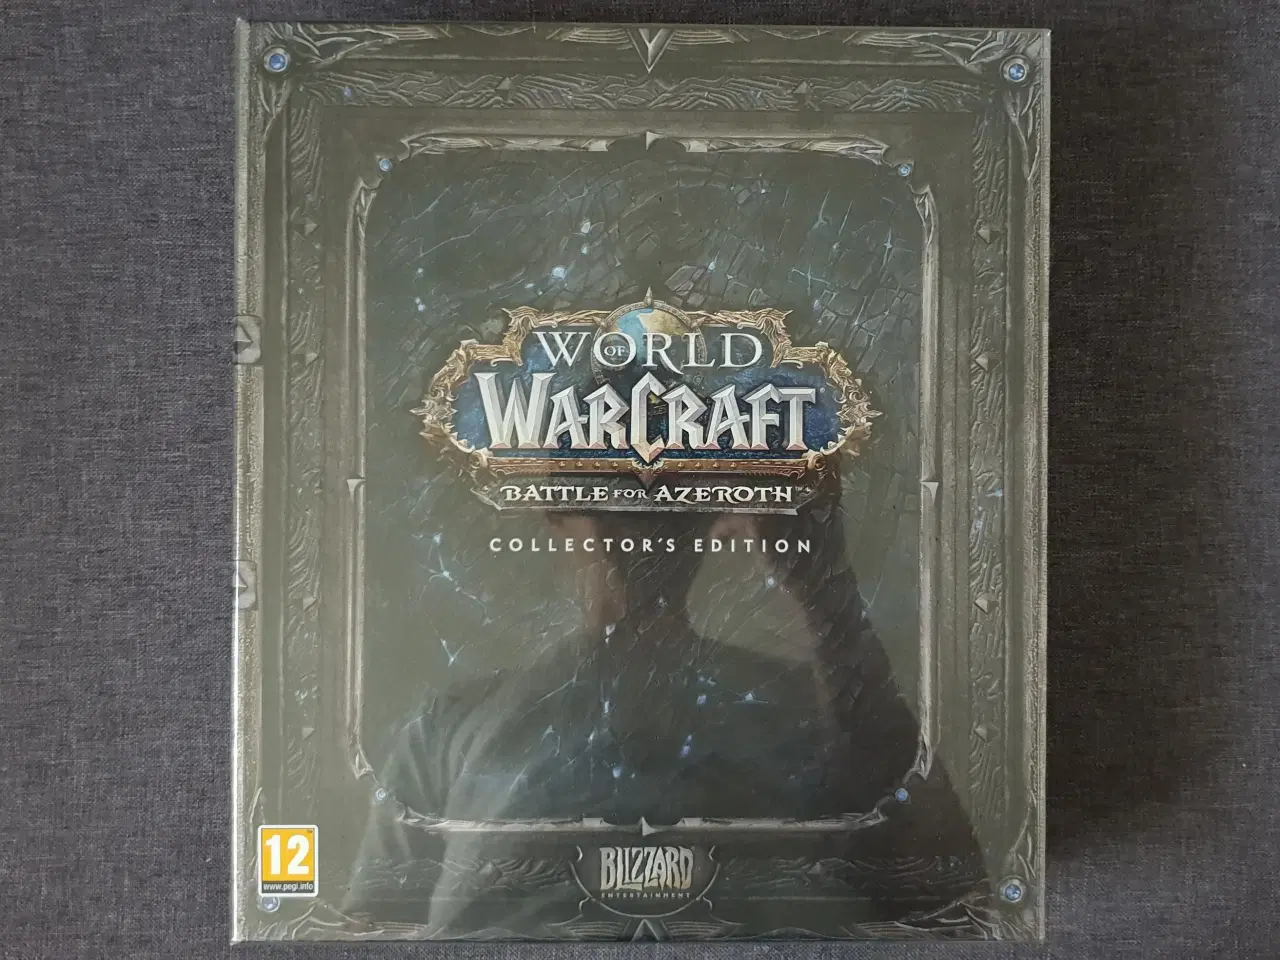 Billede 1 - World of Warcraft Battle: for Azeroth Collectors E